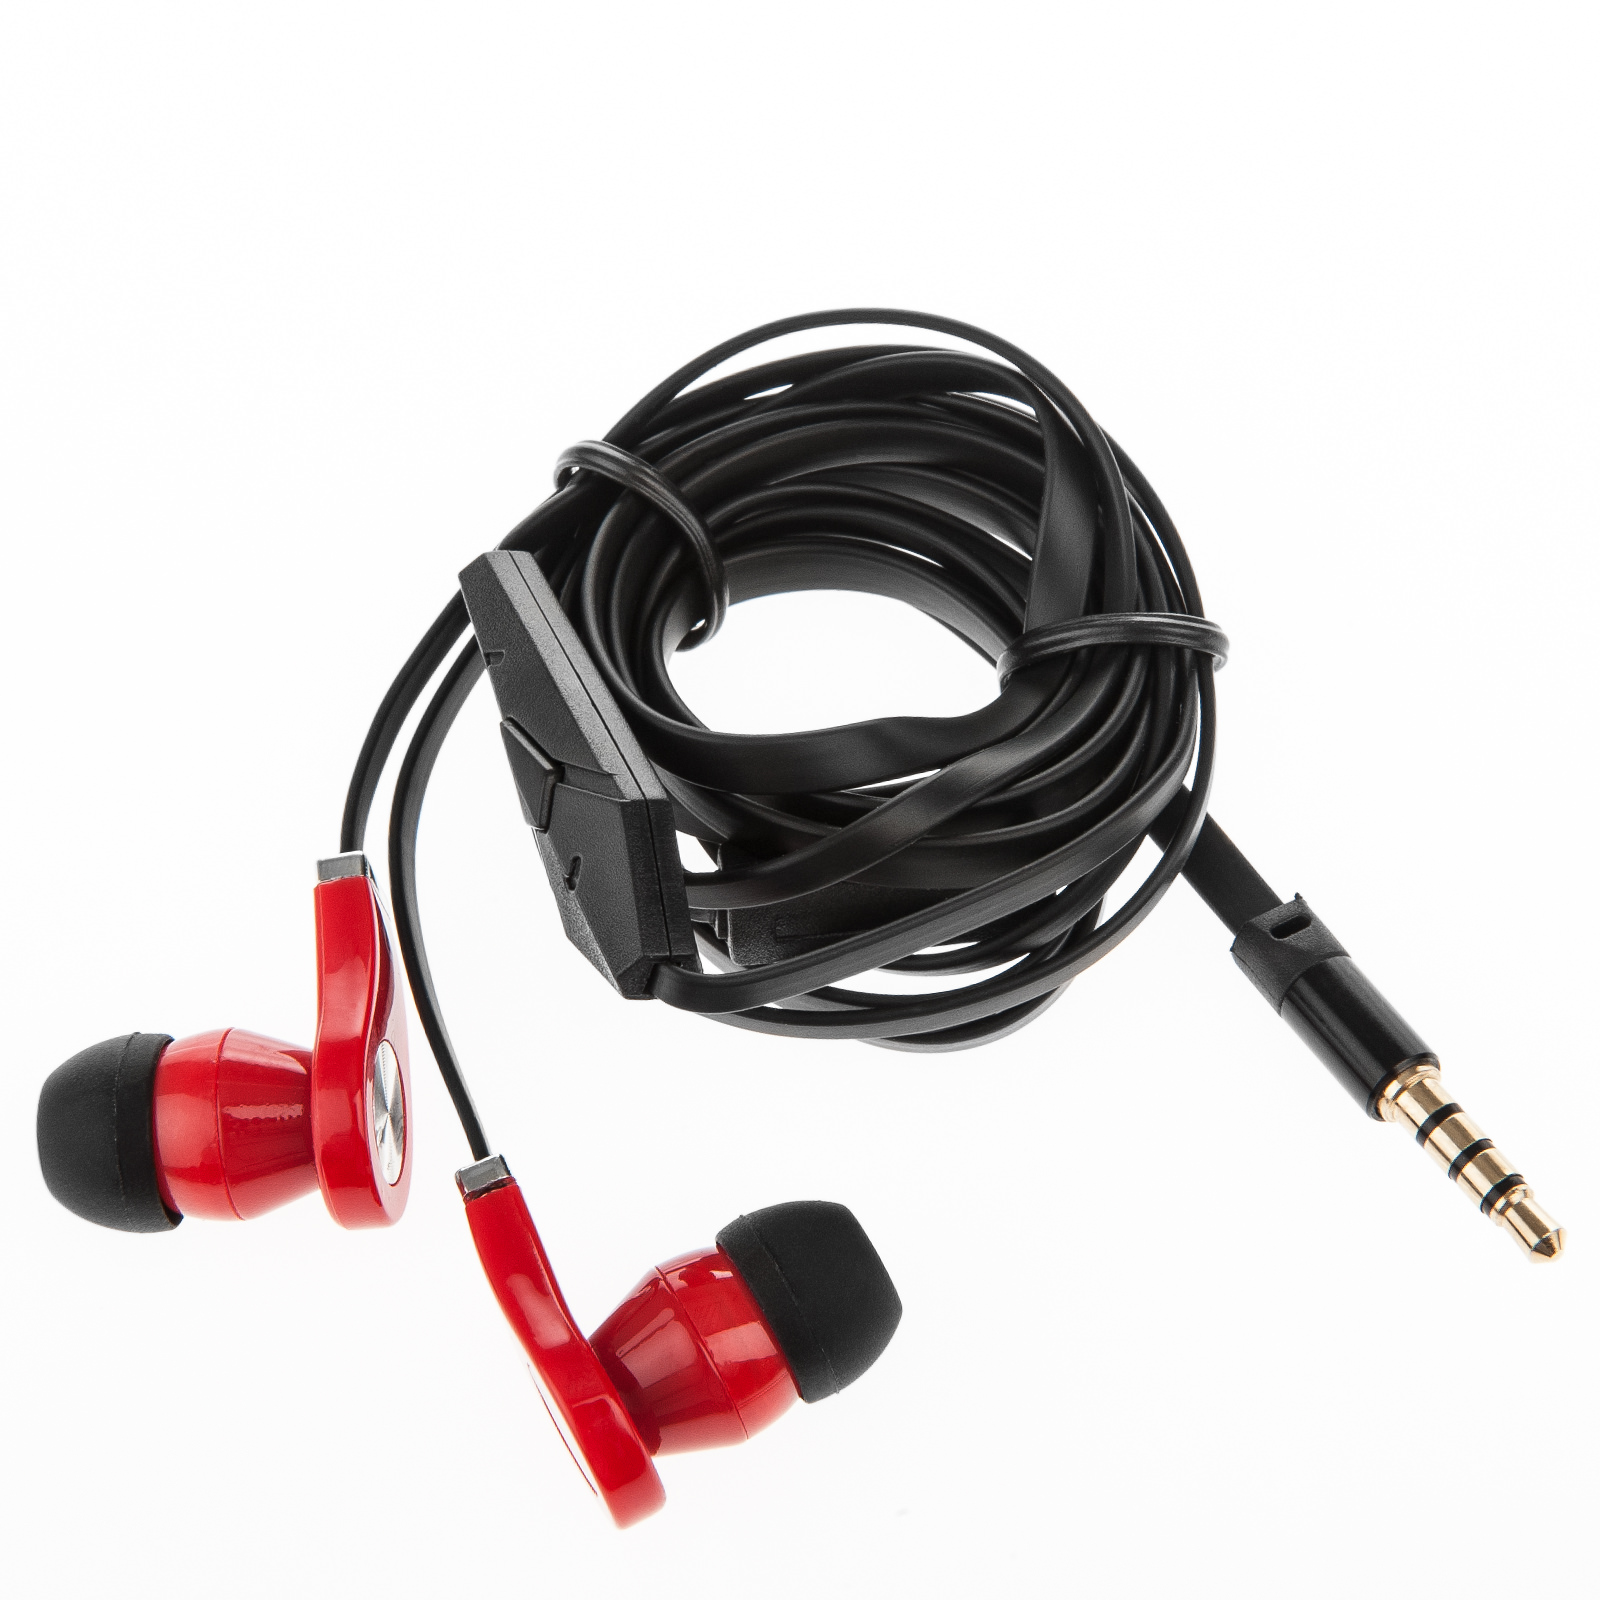 Audiance B1 Ear-Buds - Black Cable